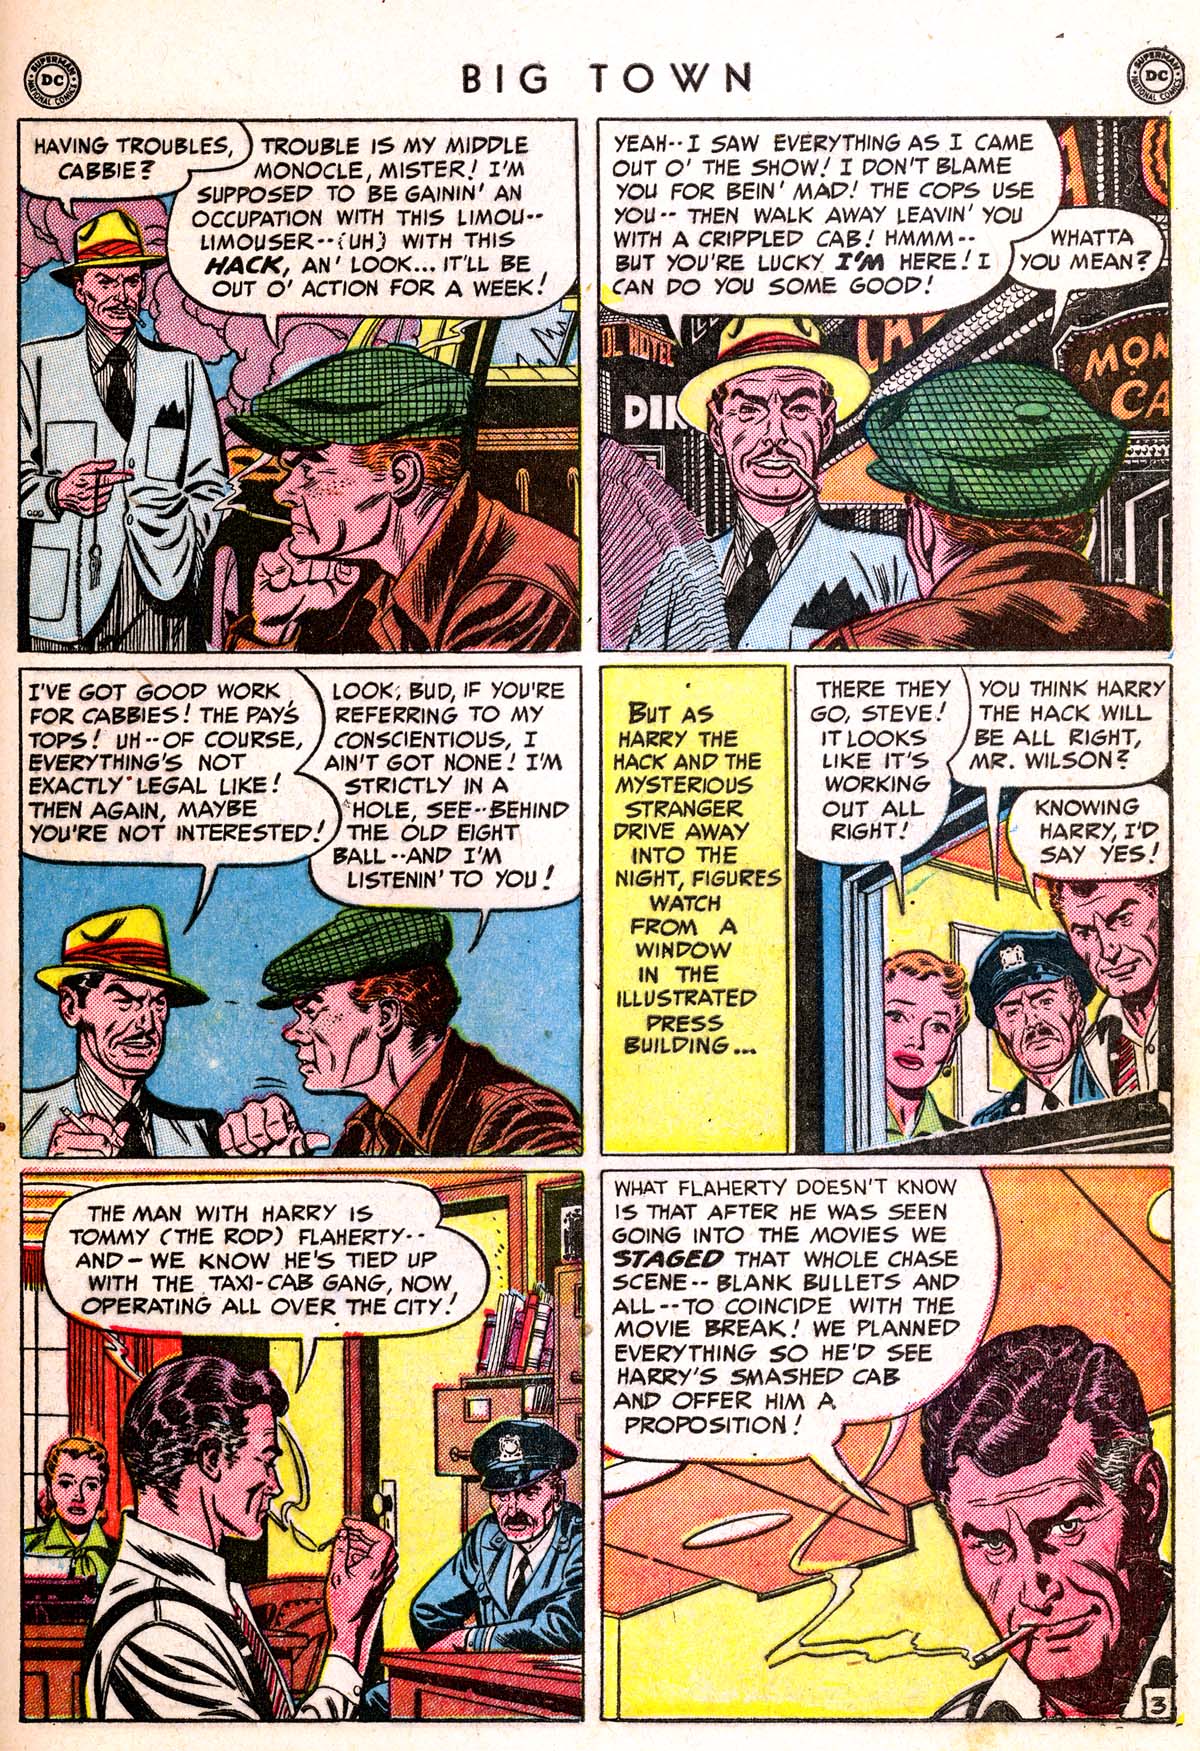 Big Town (1951) 1 Page 40